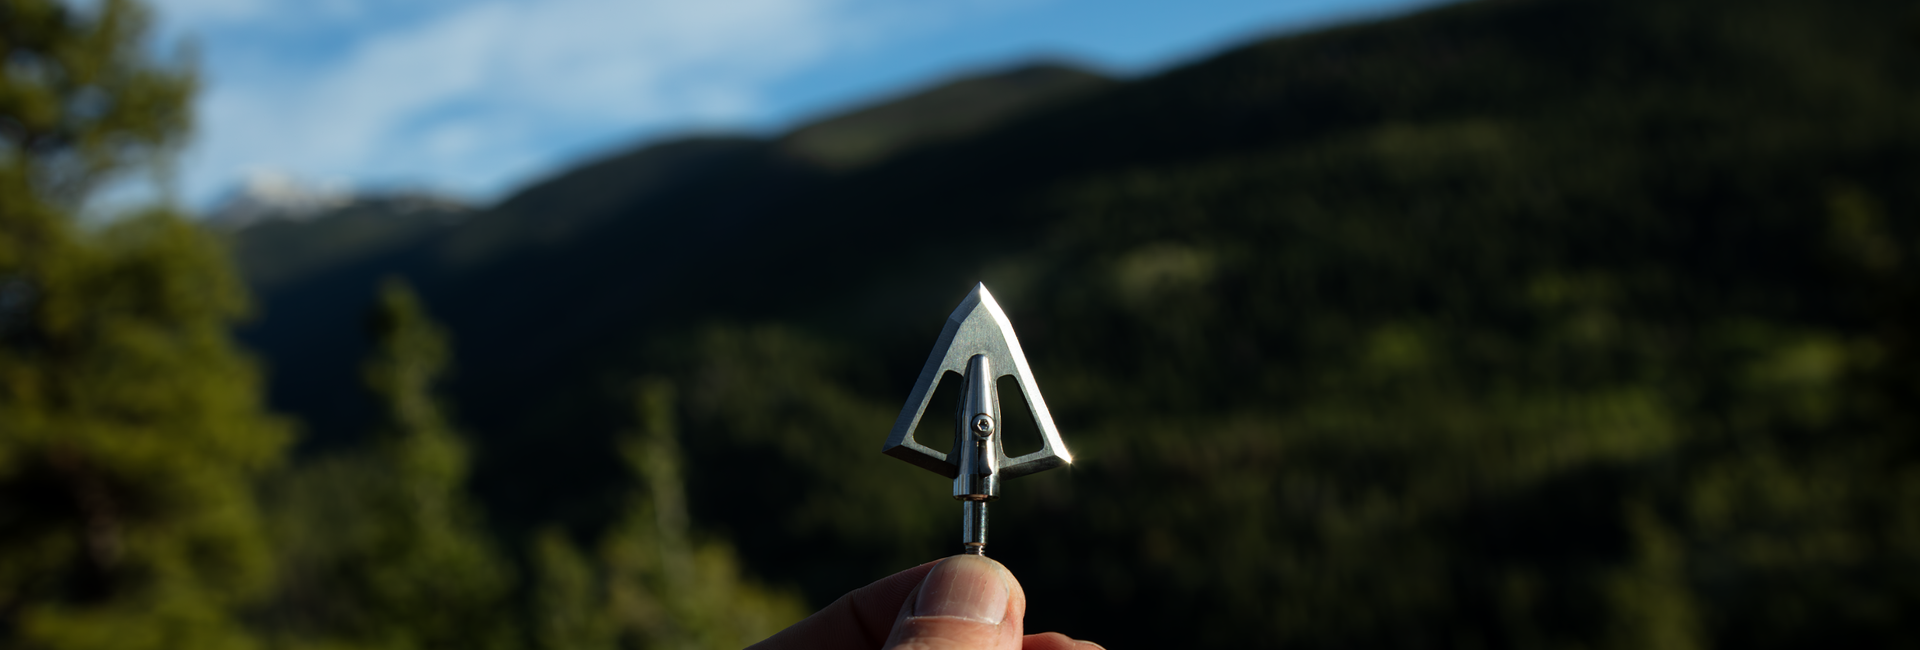 picture of a broadhead in front of a tree and mountain scene with sky